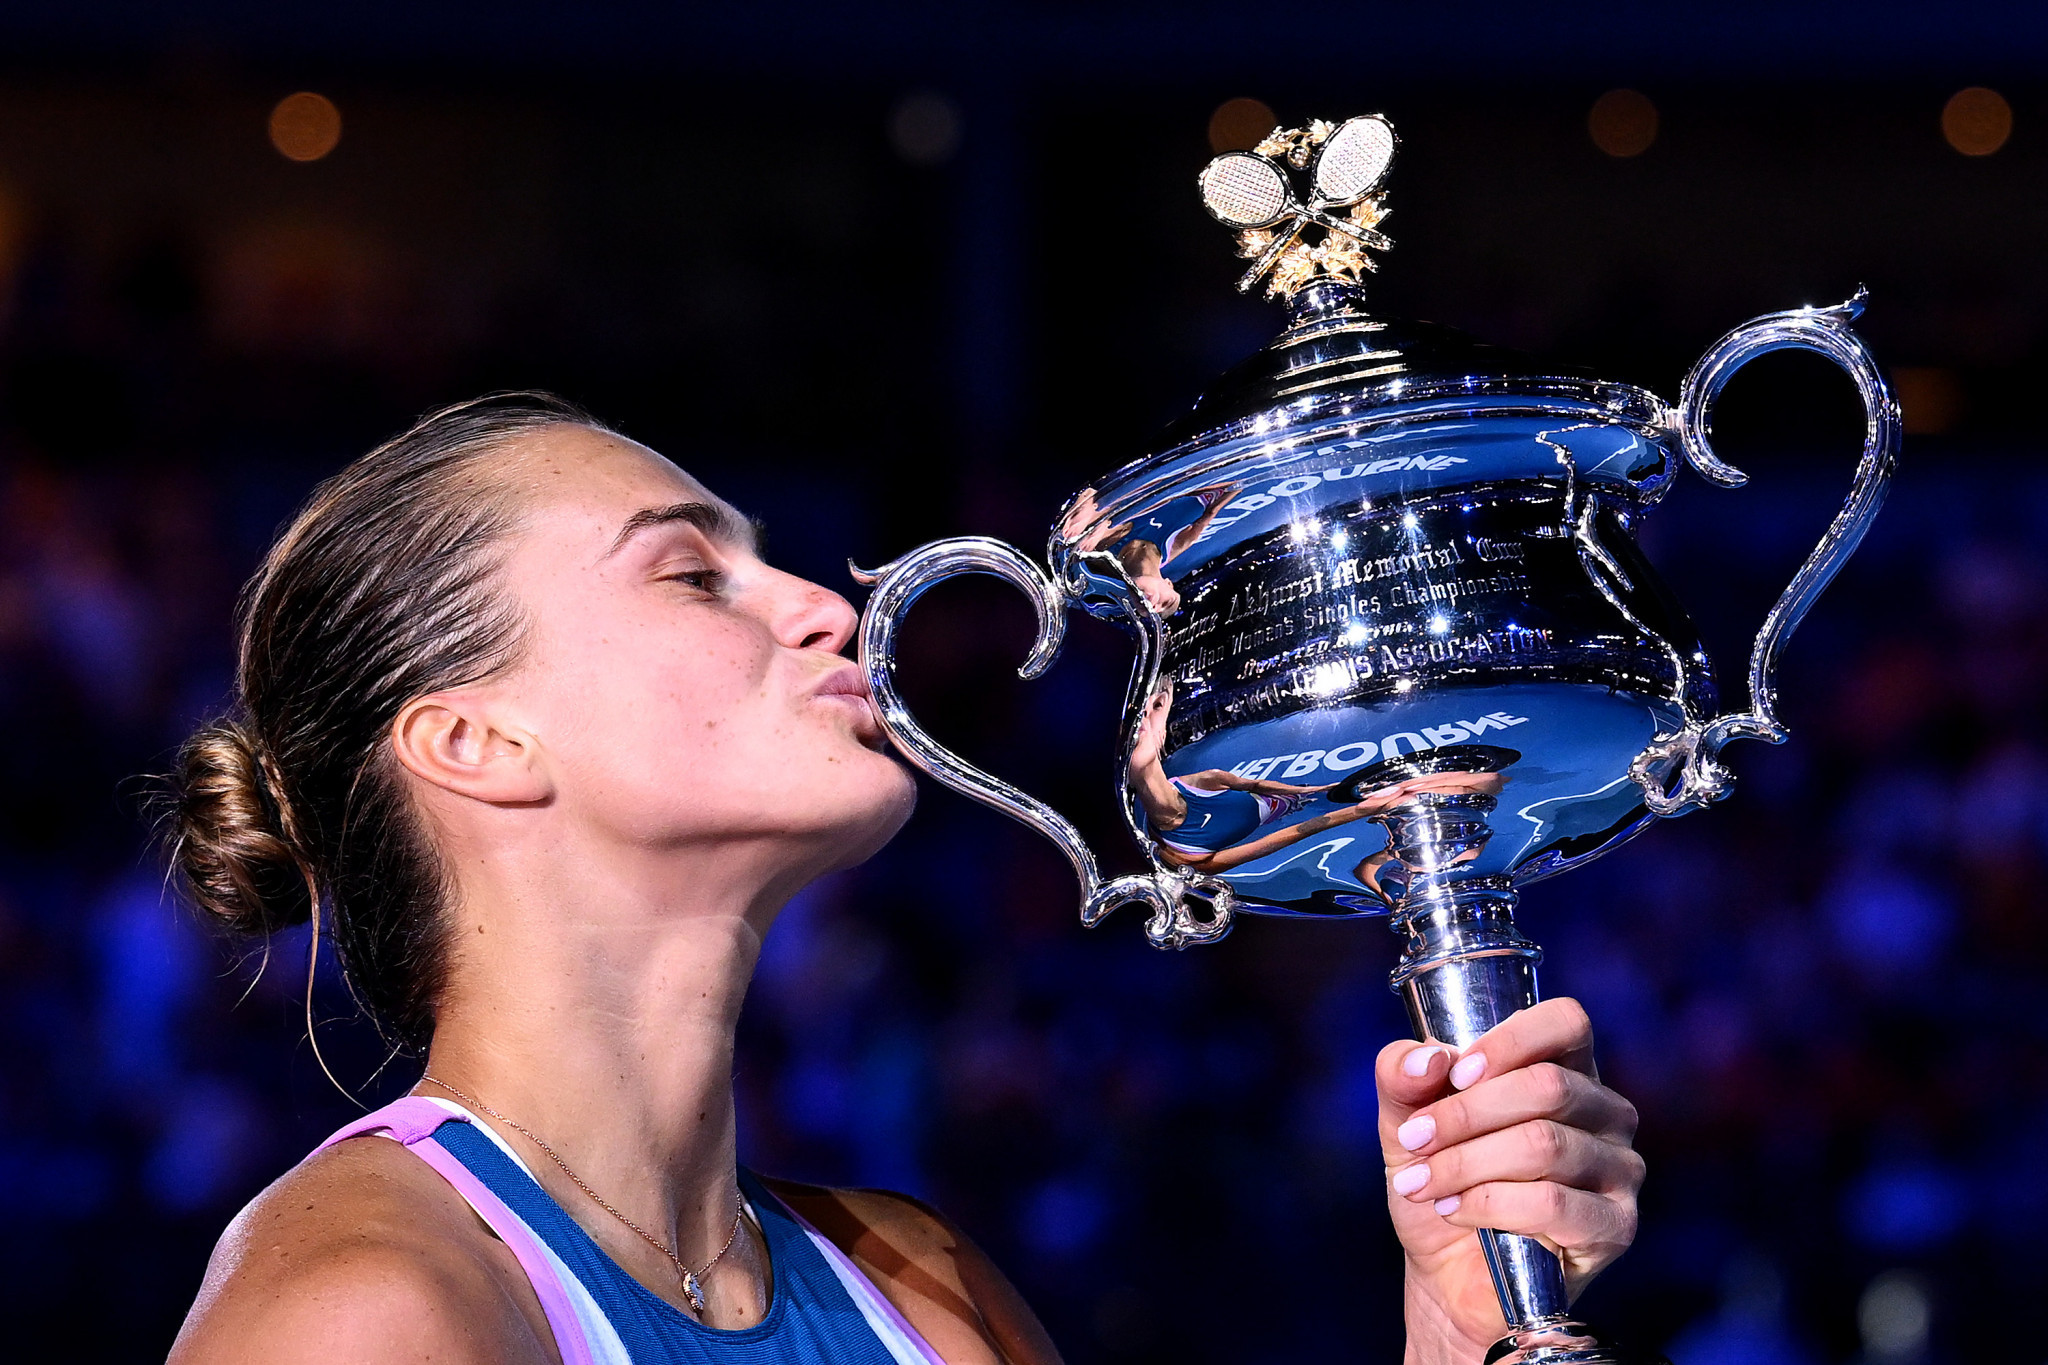 Sabalenka makes history as first "neutral" to win Grand Slam with Australian Open victory